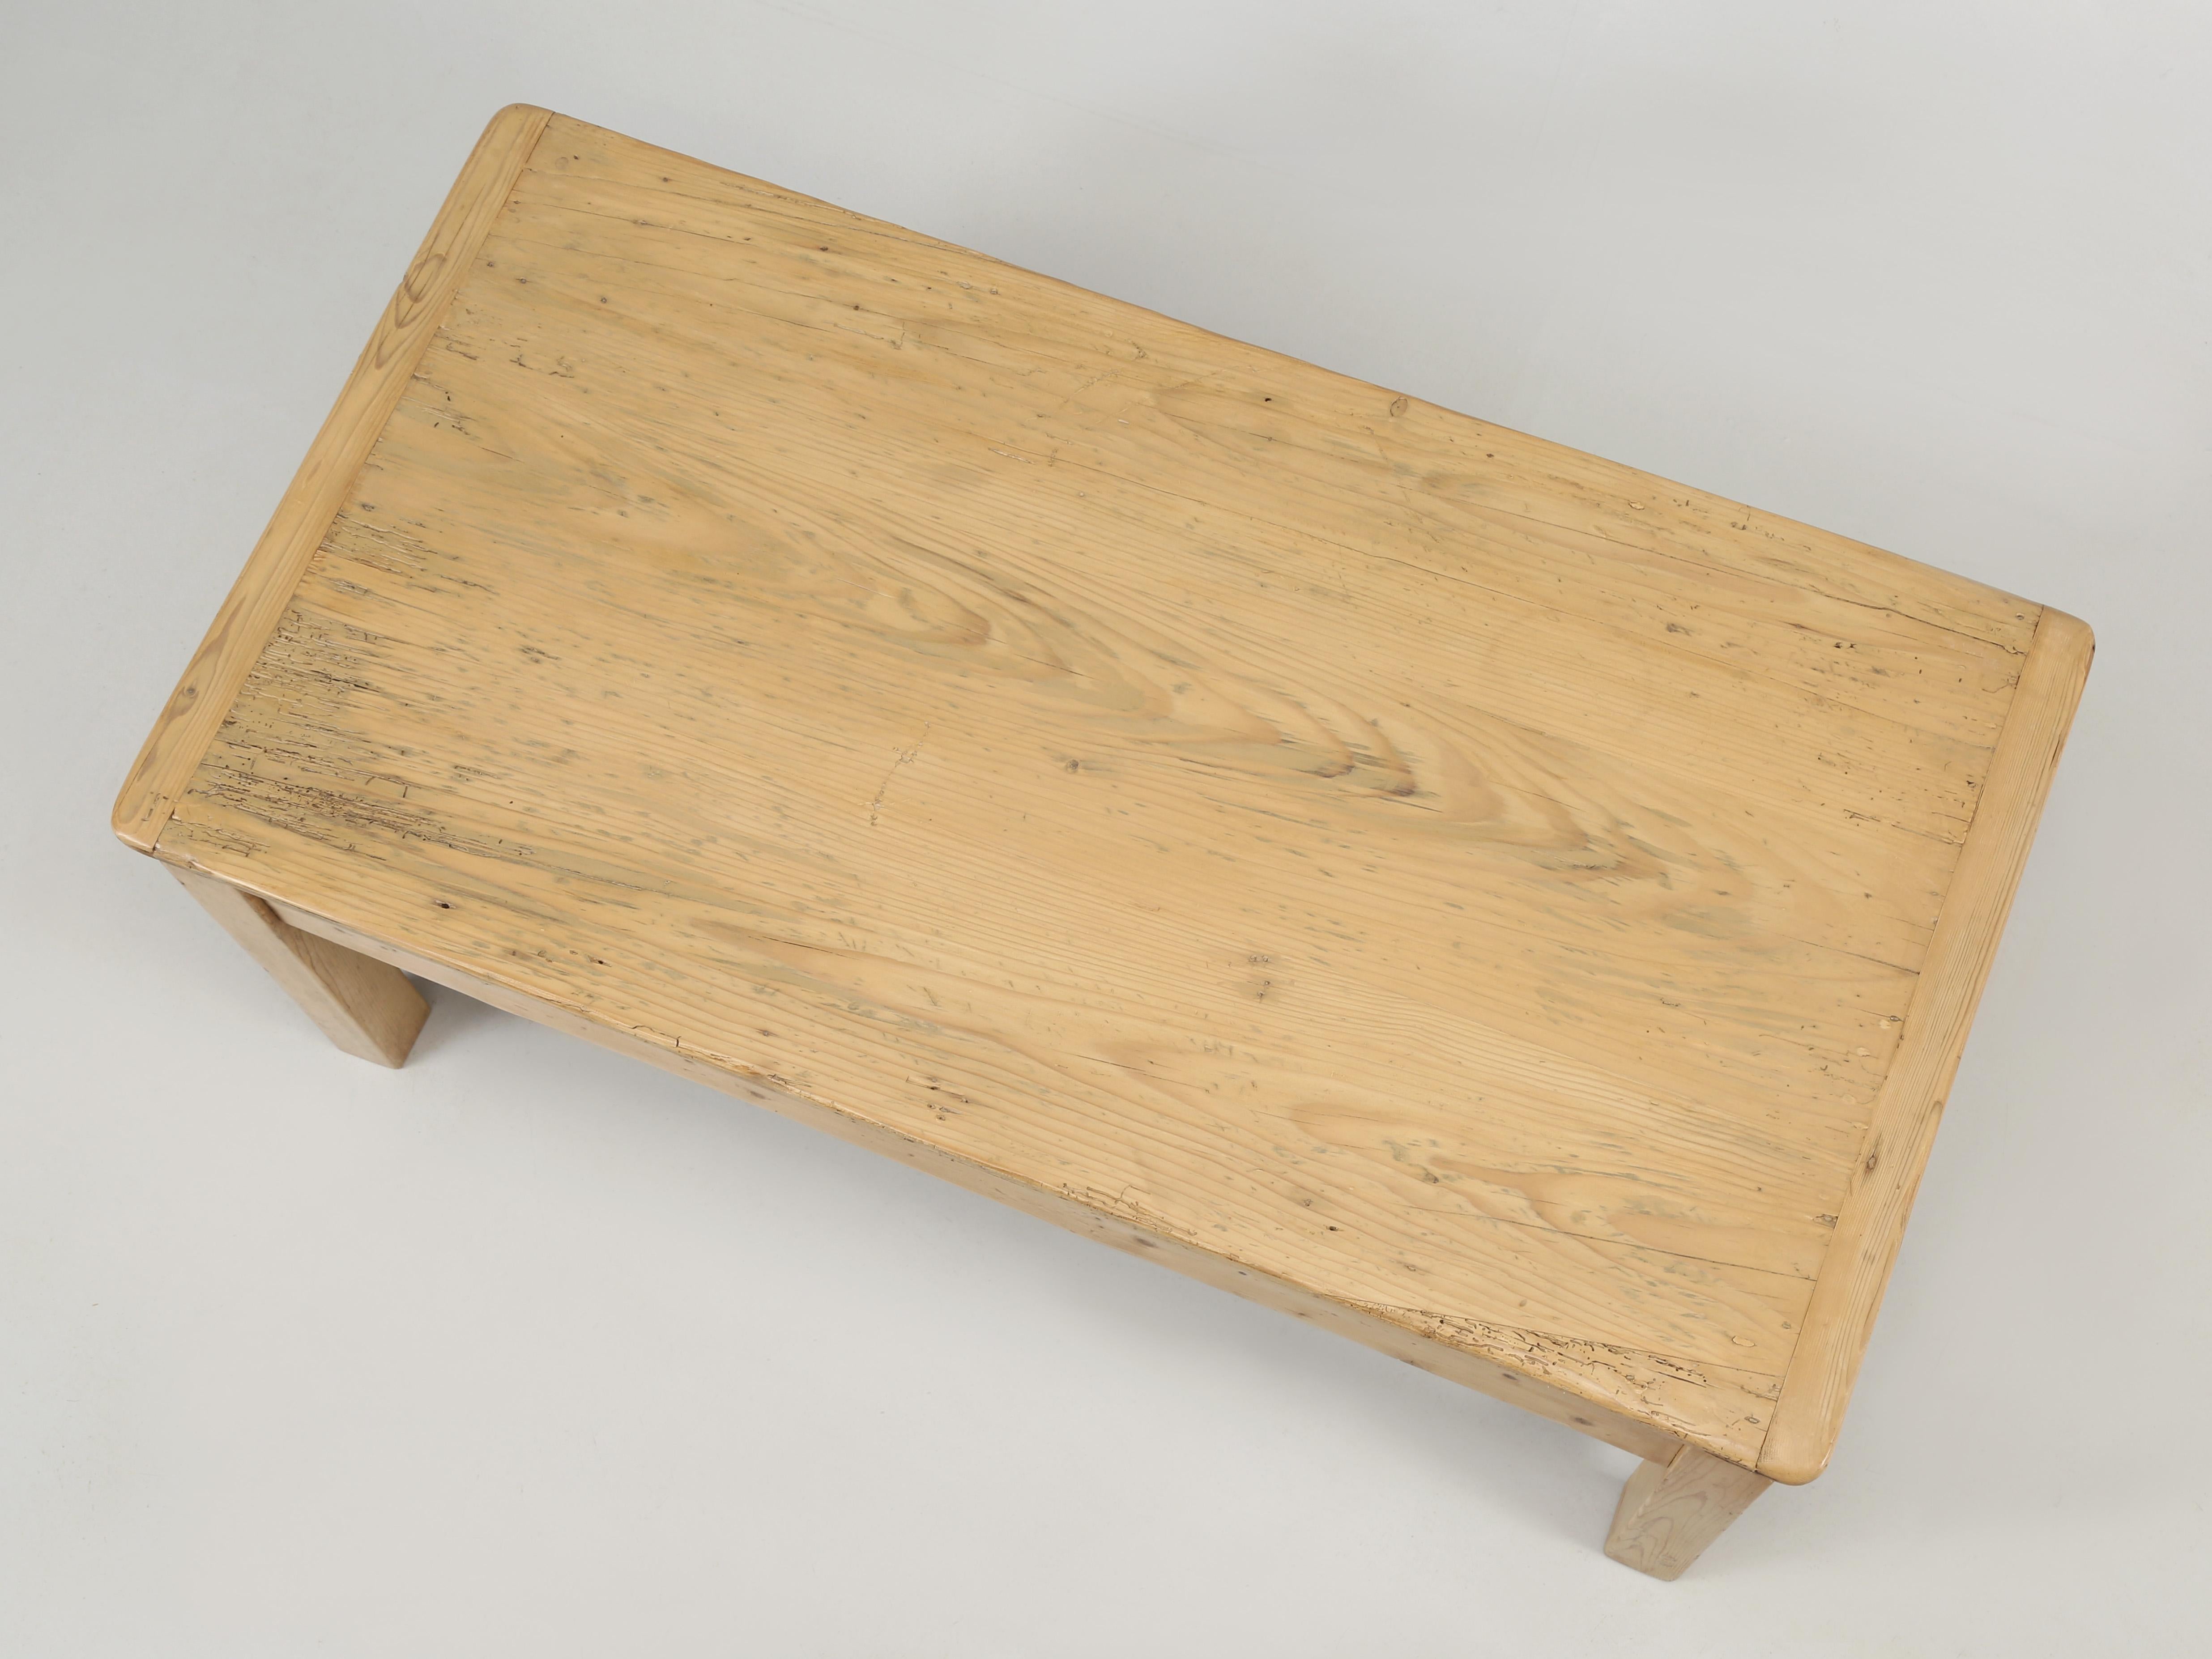 Antique Irish scrubbed pine coffee table that was originally born as a small kitchen table. The history of the coffee table may have originated from the Ottoman Empire, where low tables were used in the Japanese tea gardens. However, they were never